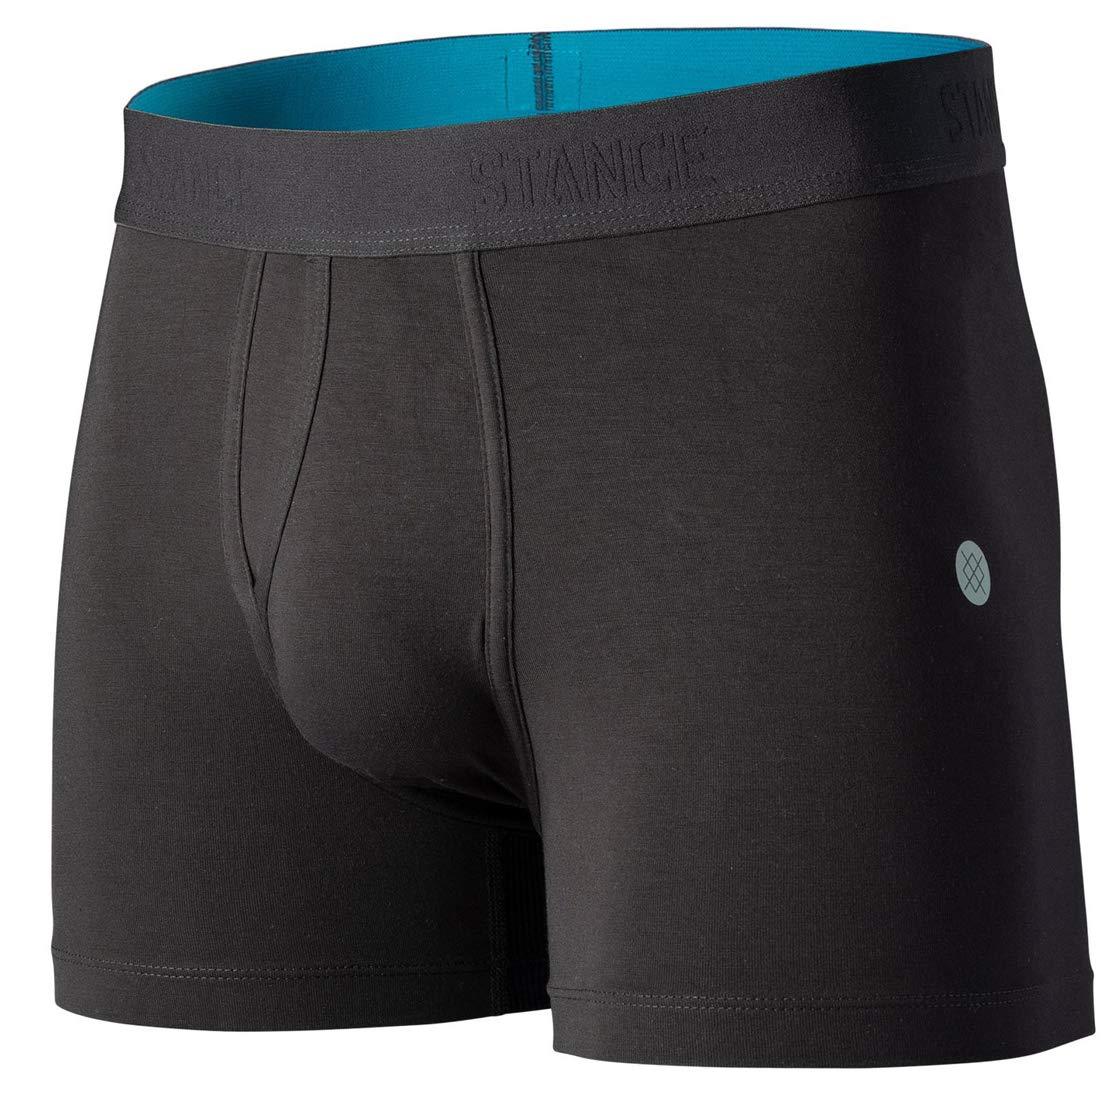 Stance Boxer Brief Staple St 4in in Black for Men - Lyst